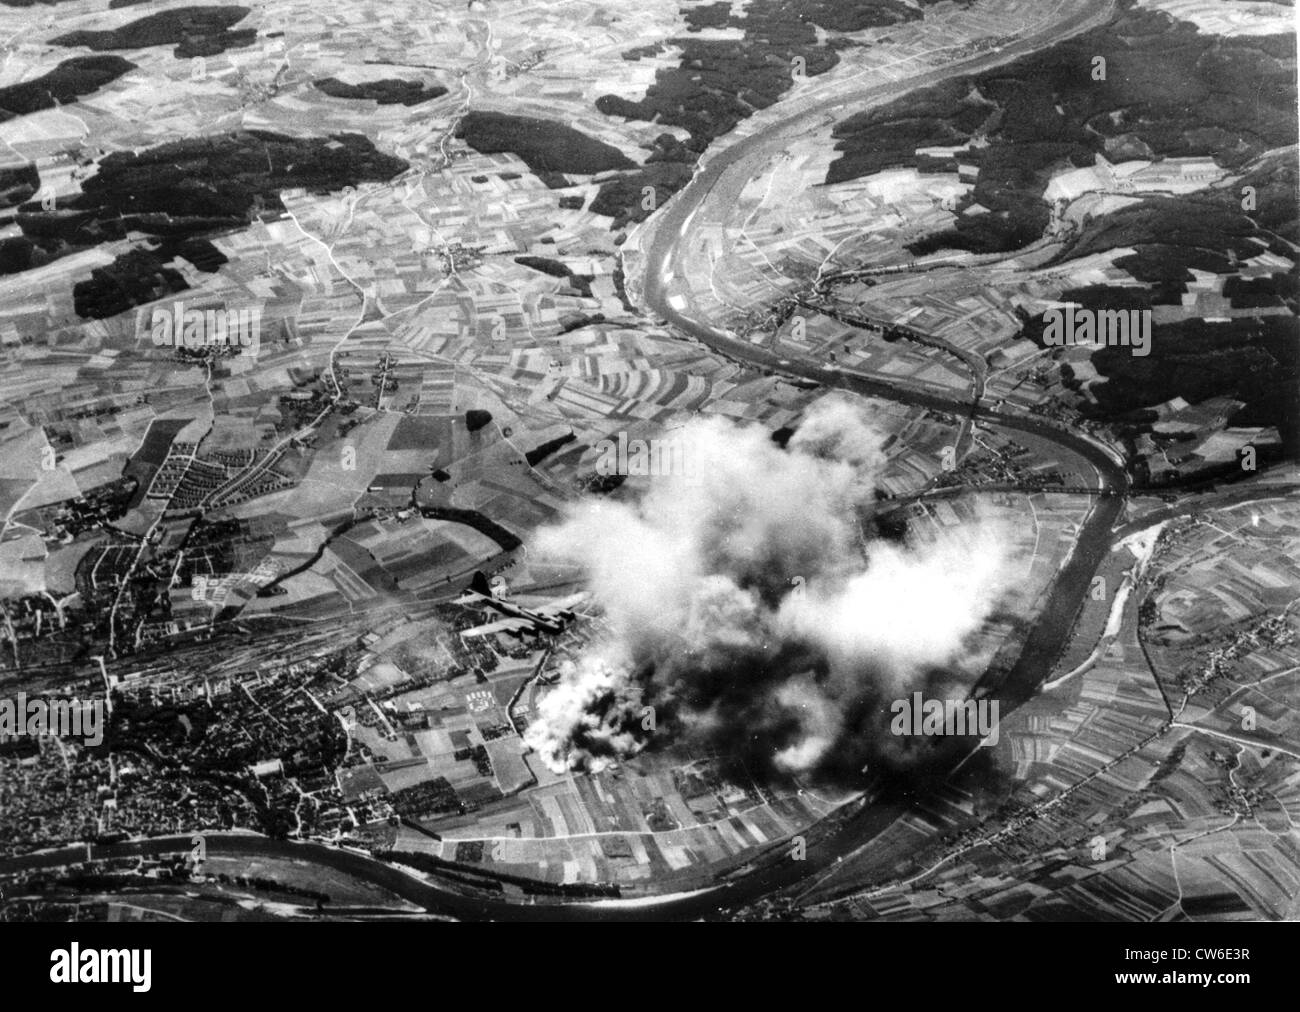 American B-17 attacked an aircraft factory at Regensburg, August 17, 1943 Stock Photo